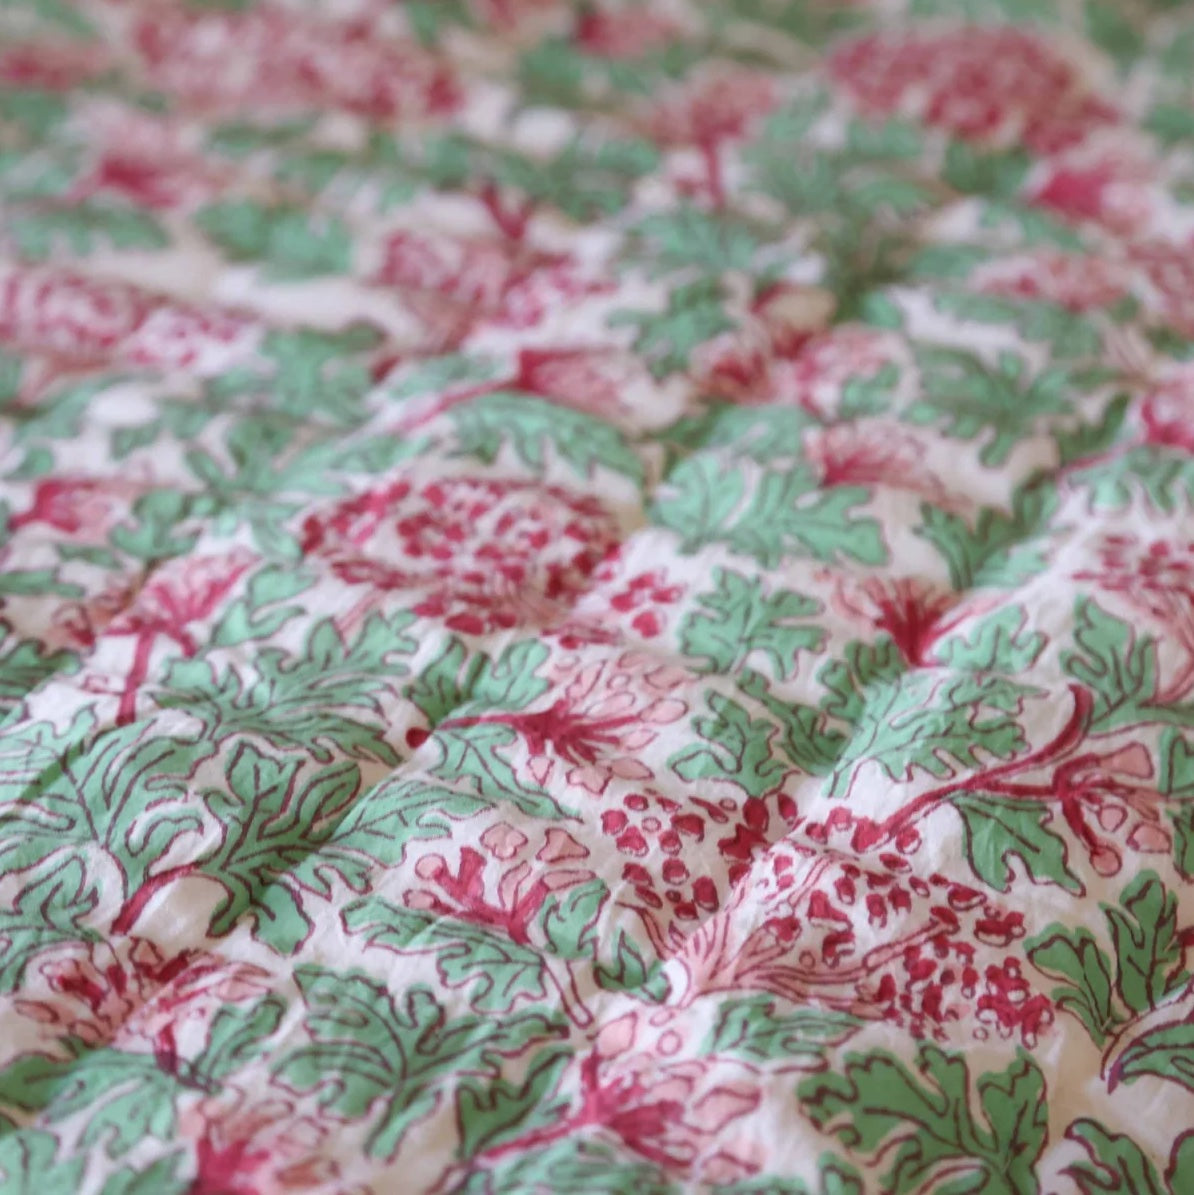 Kelpie' Handblock Printed Pink & Green Floral Quilt with Striped Border